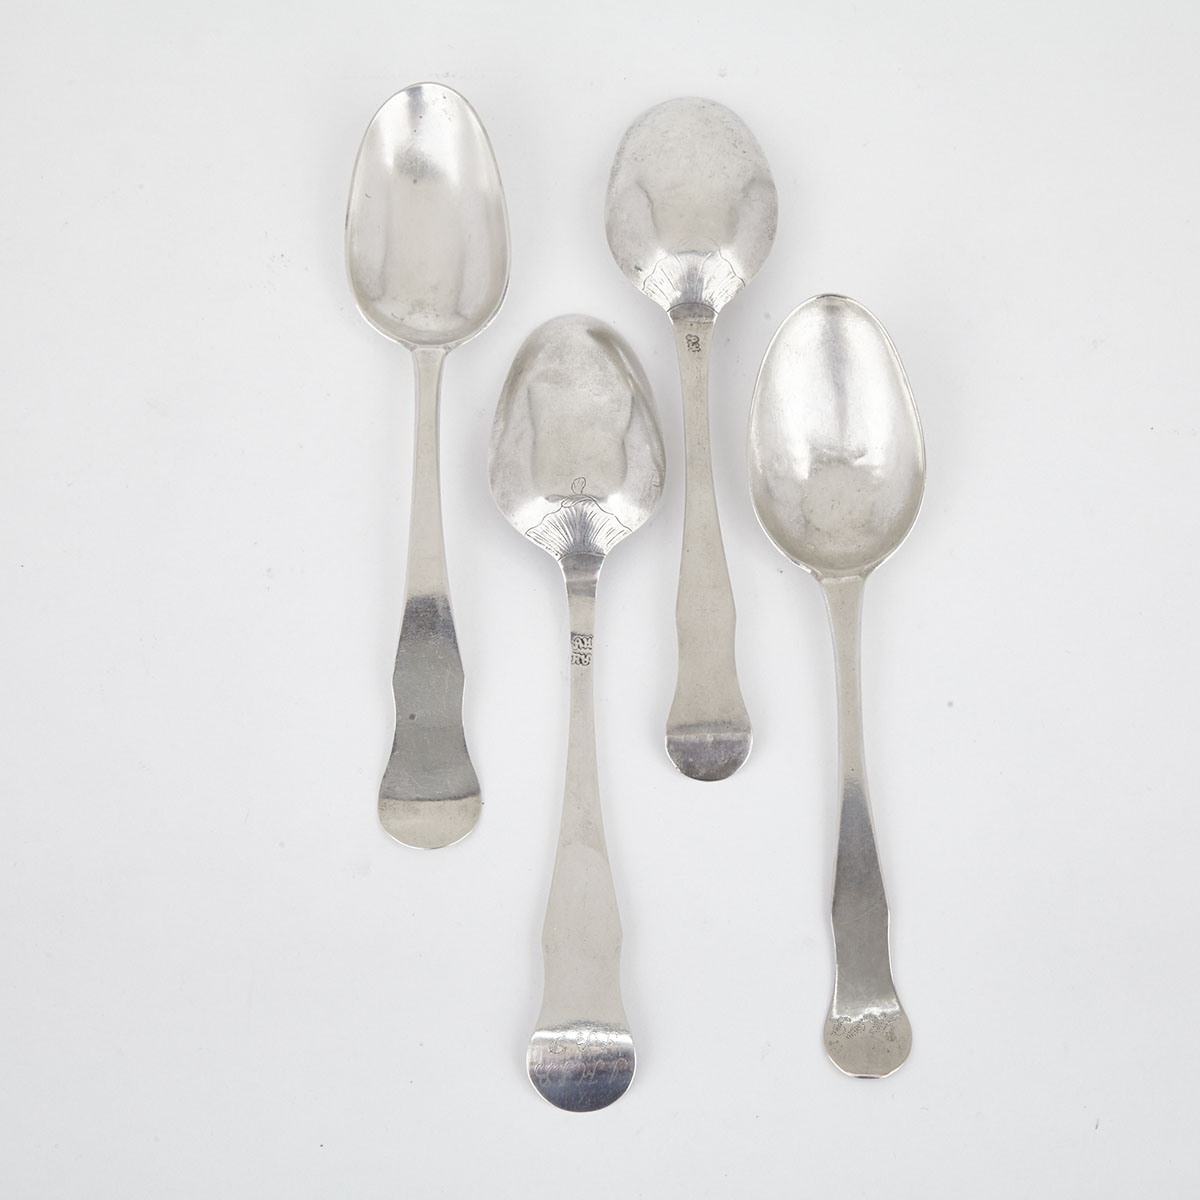 Four Continental Silver Table Spoons, 18th century